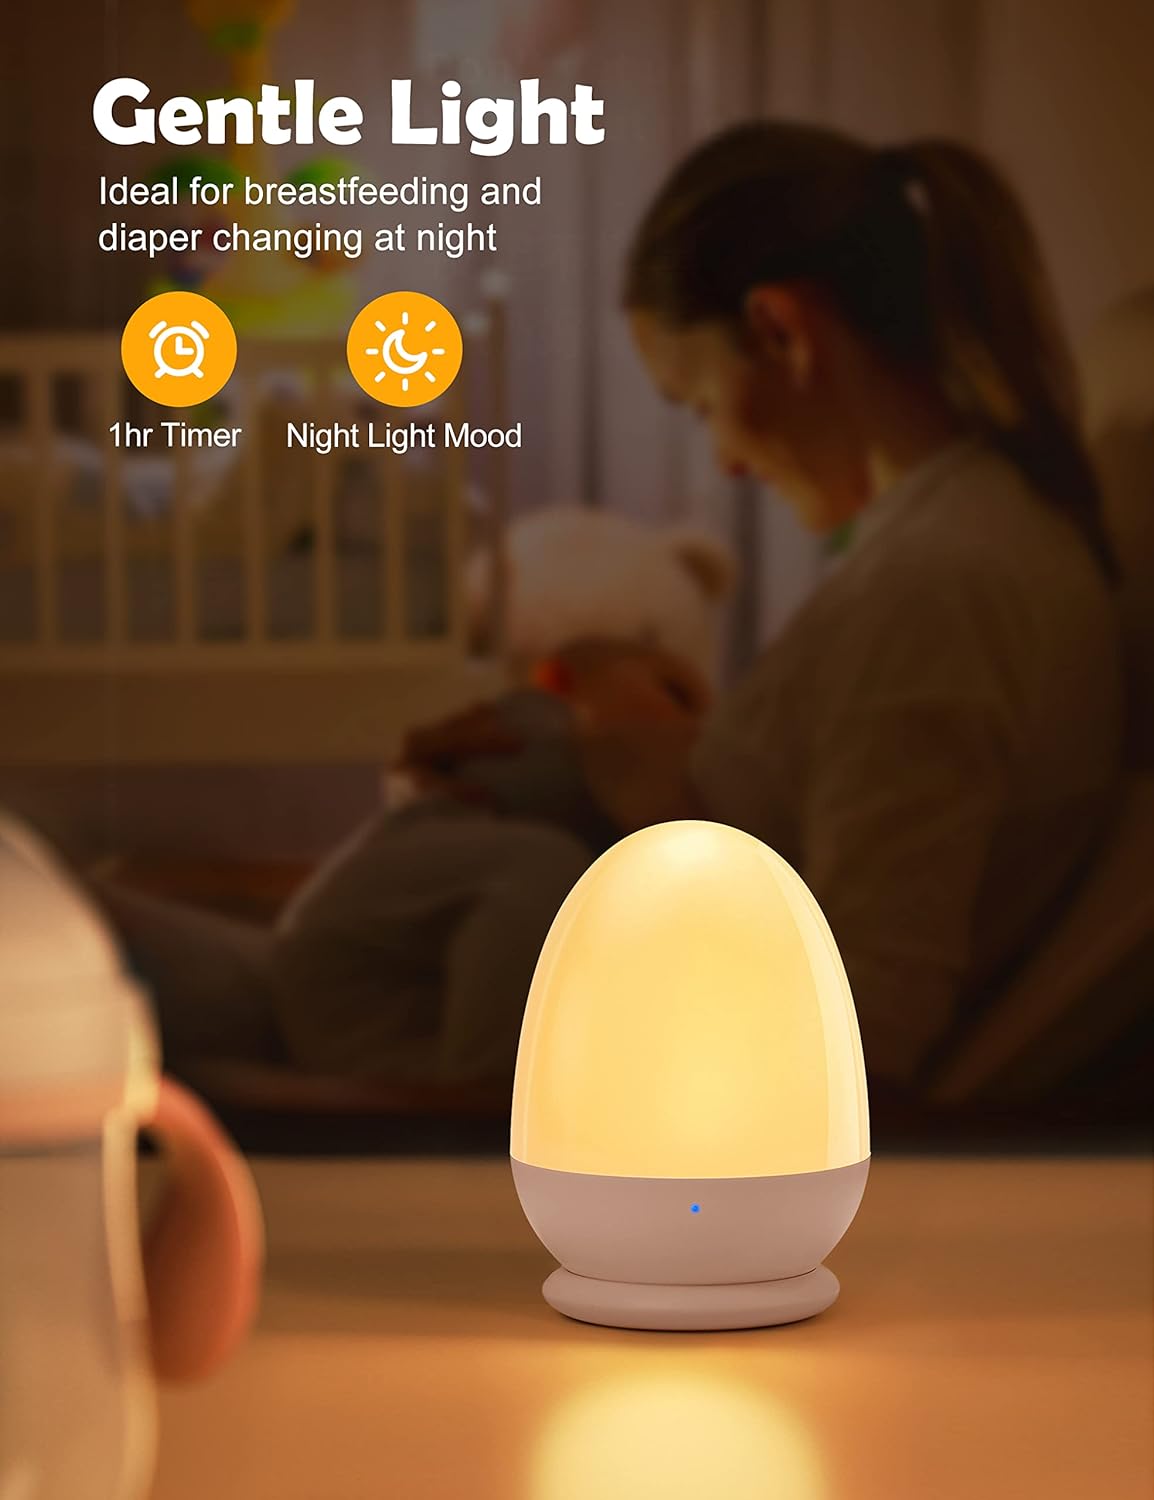 JolyWell Baby Night Light for Kid, Portable Egg Nightlight with Stable Charging Pad, Touch Nursery Night Lamp for Breastfeeding, Toddler Night Light for Bedroom, Timer Setting, ABS+PC, White-2